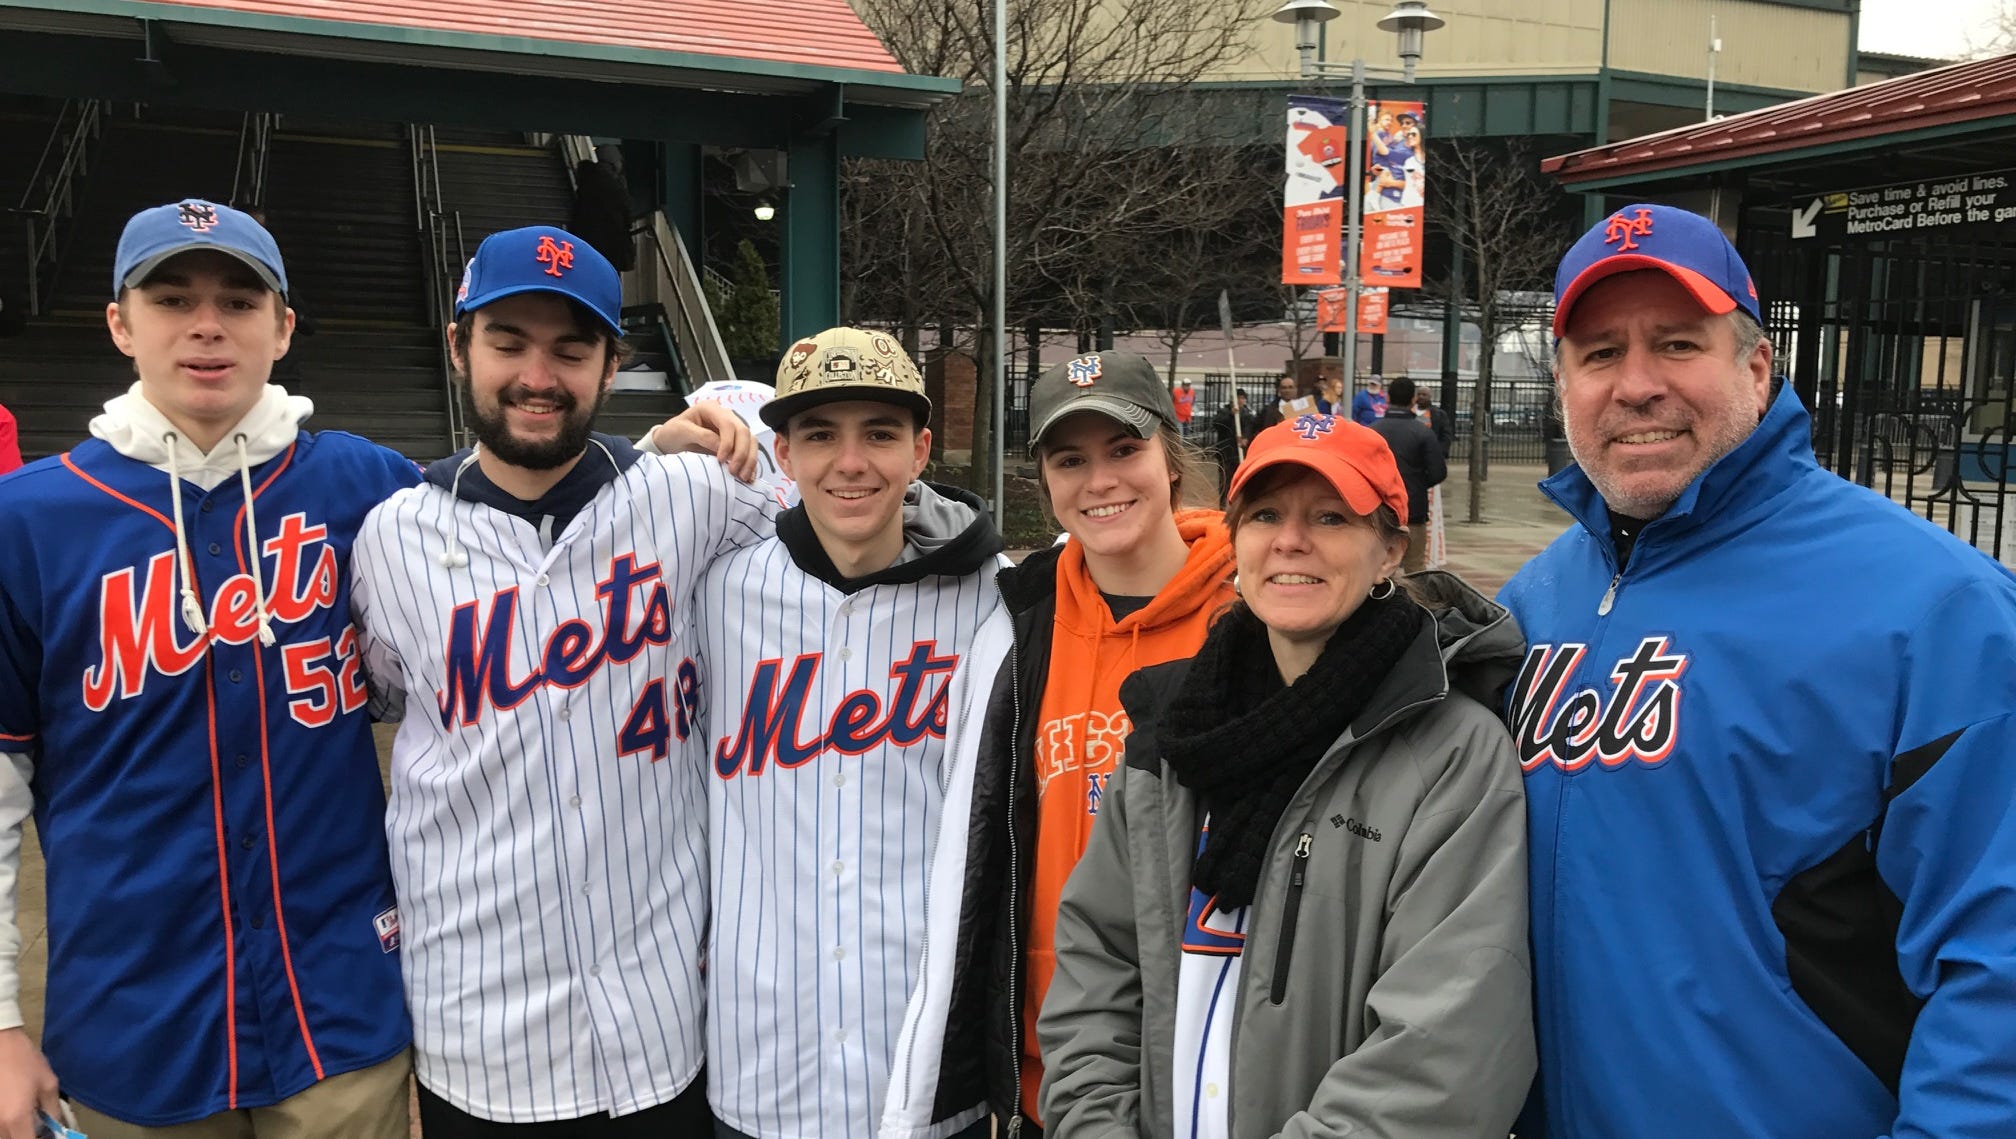 NY Mets opening day has fans hopeful